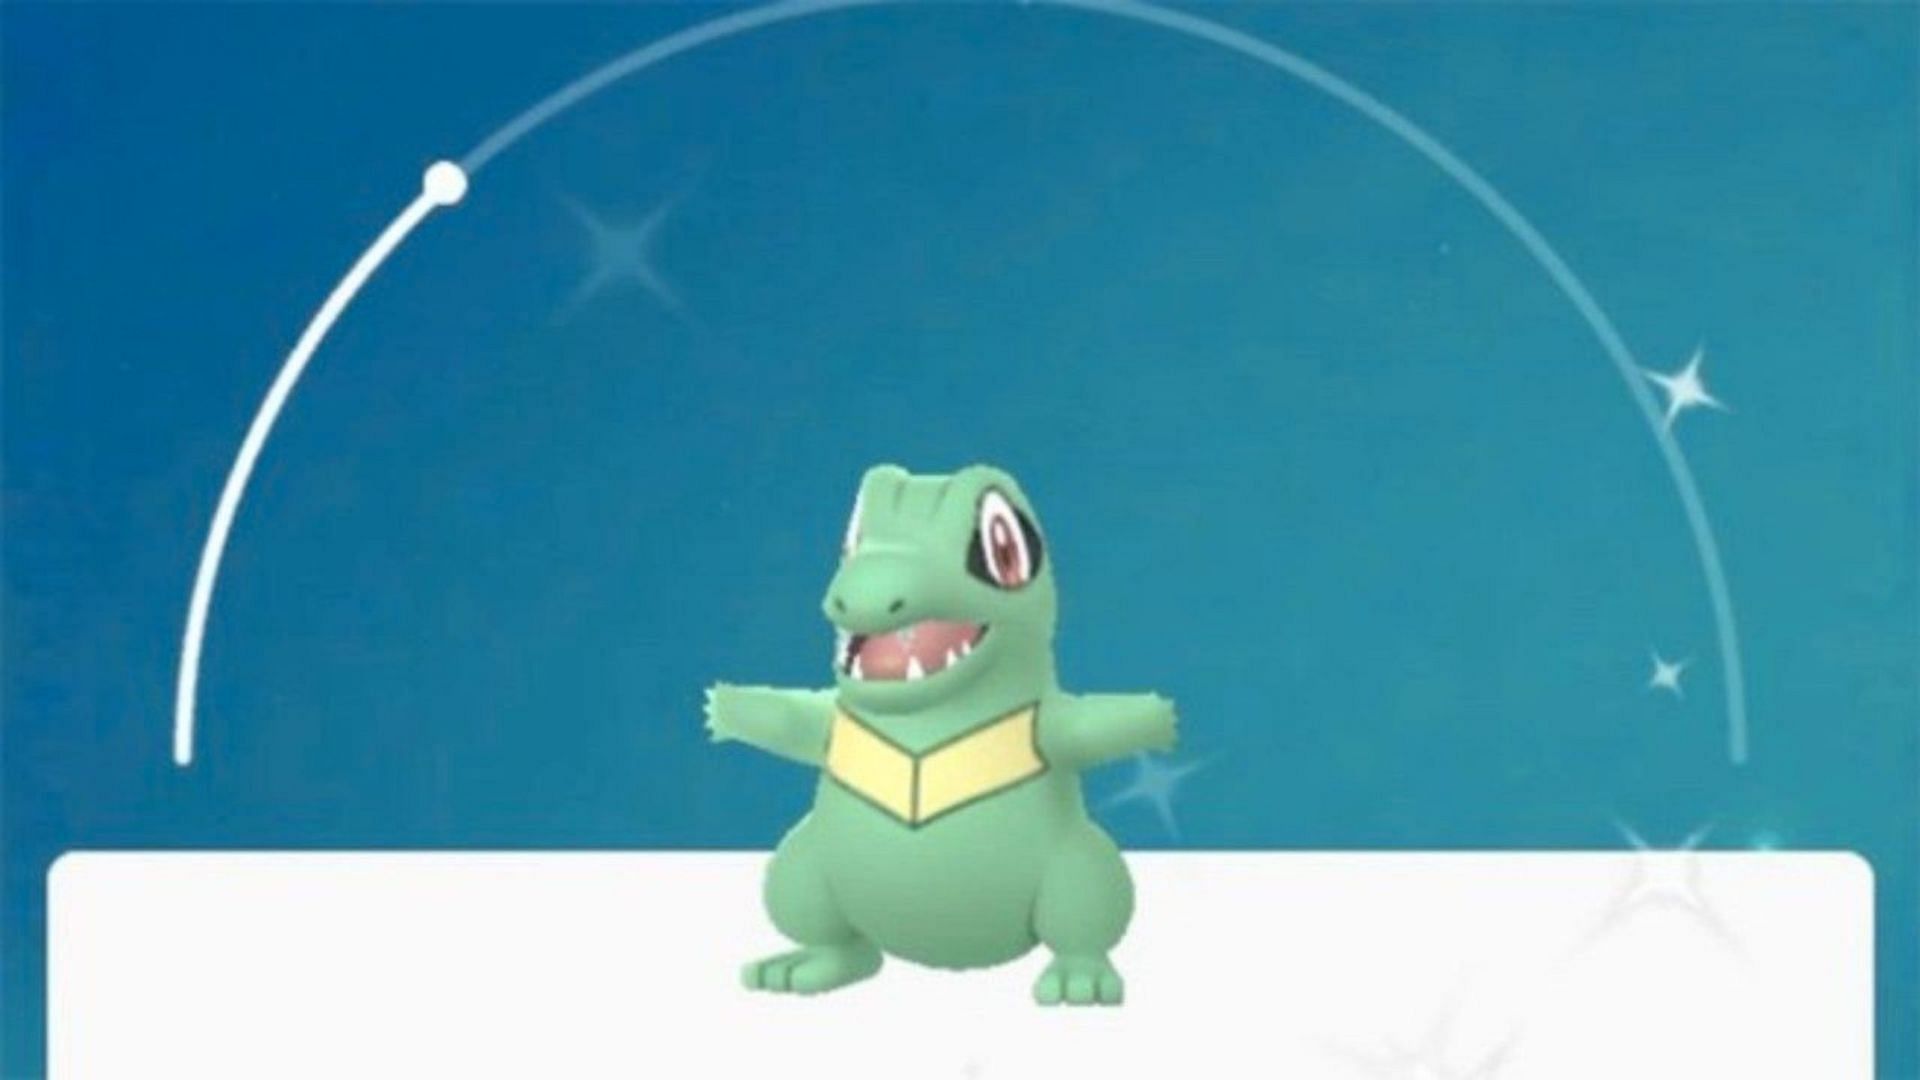 Shiny Totodile as it appears in Pokemon GO (Image via Niantic)